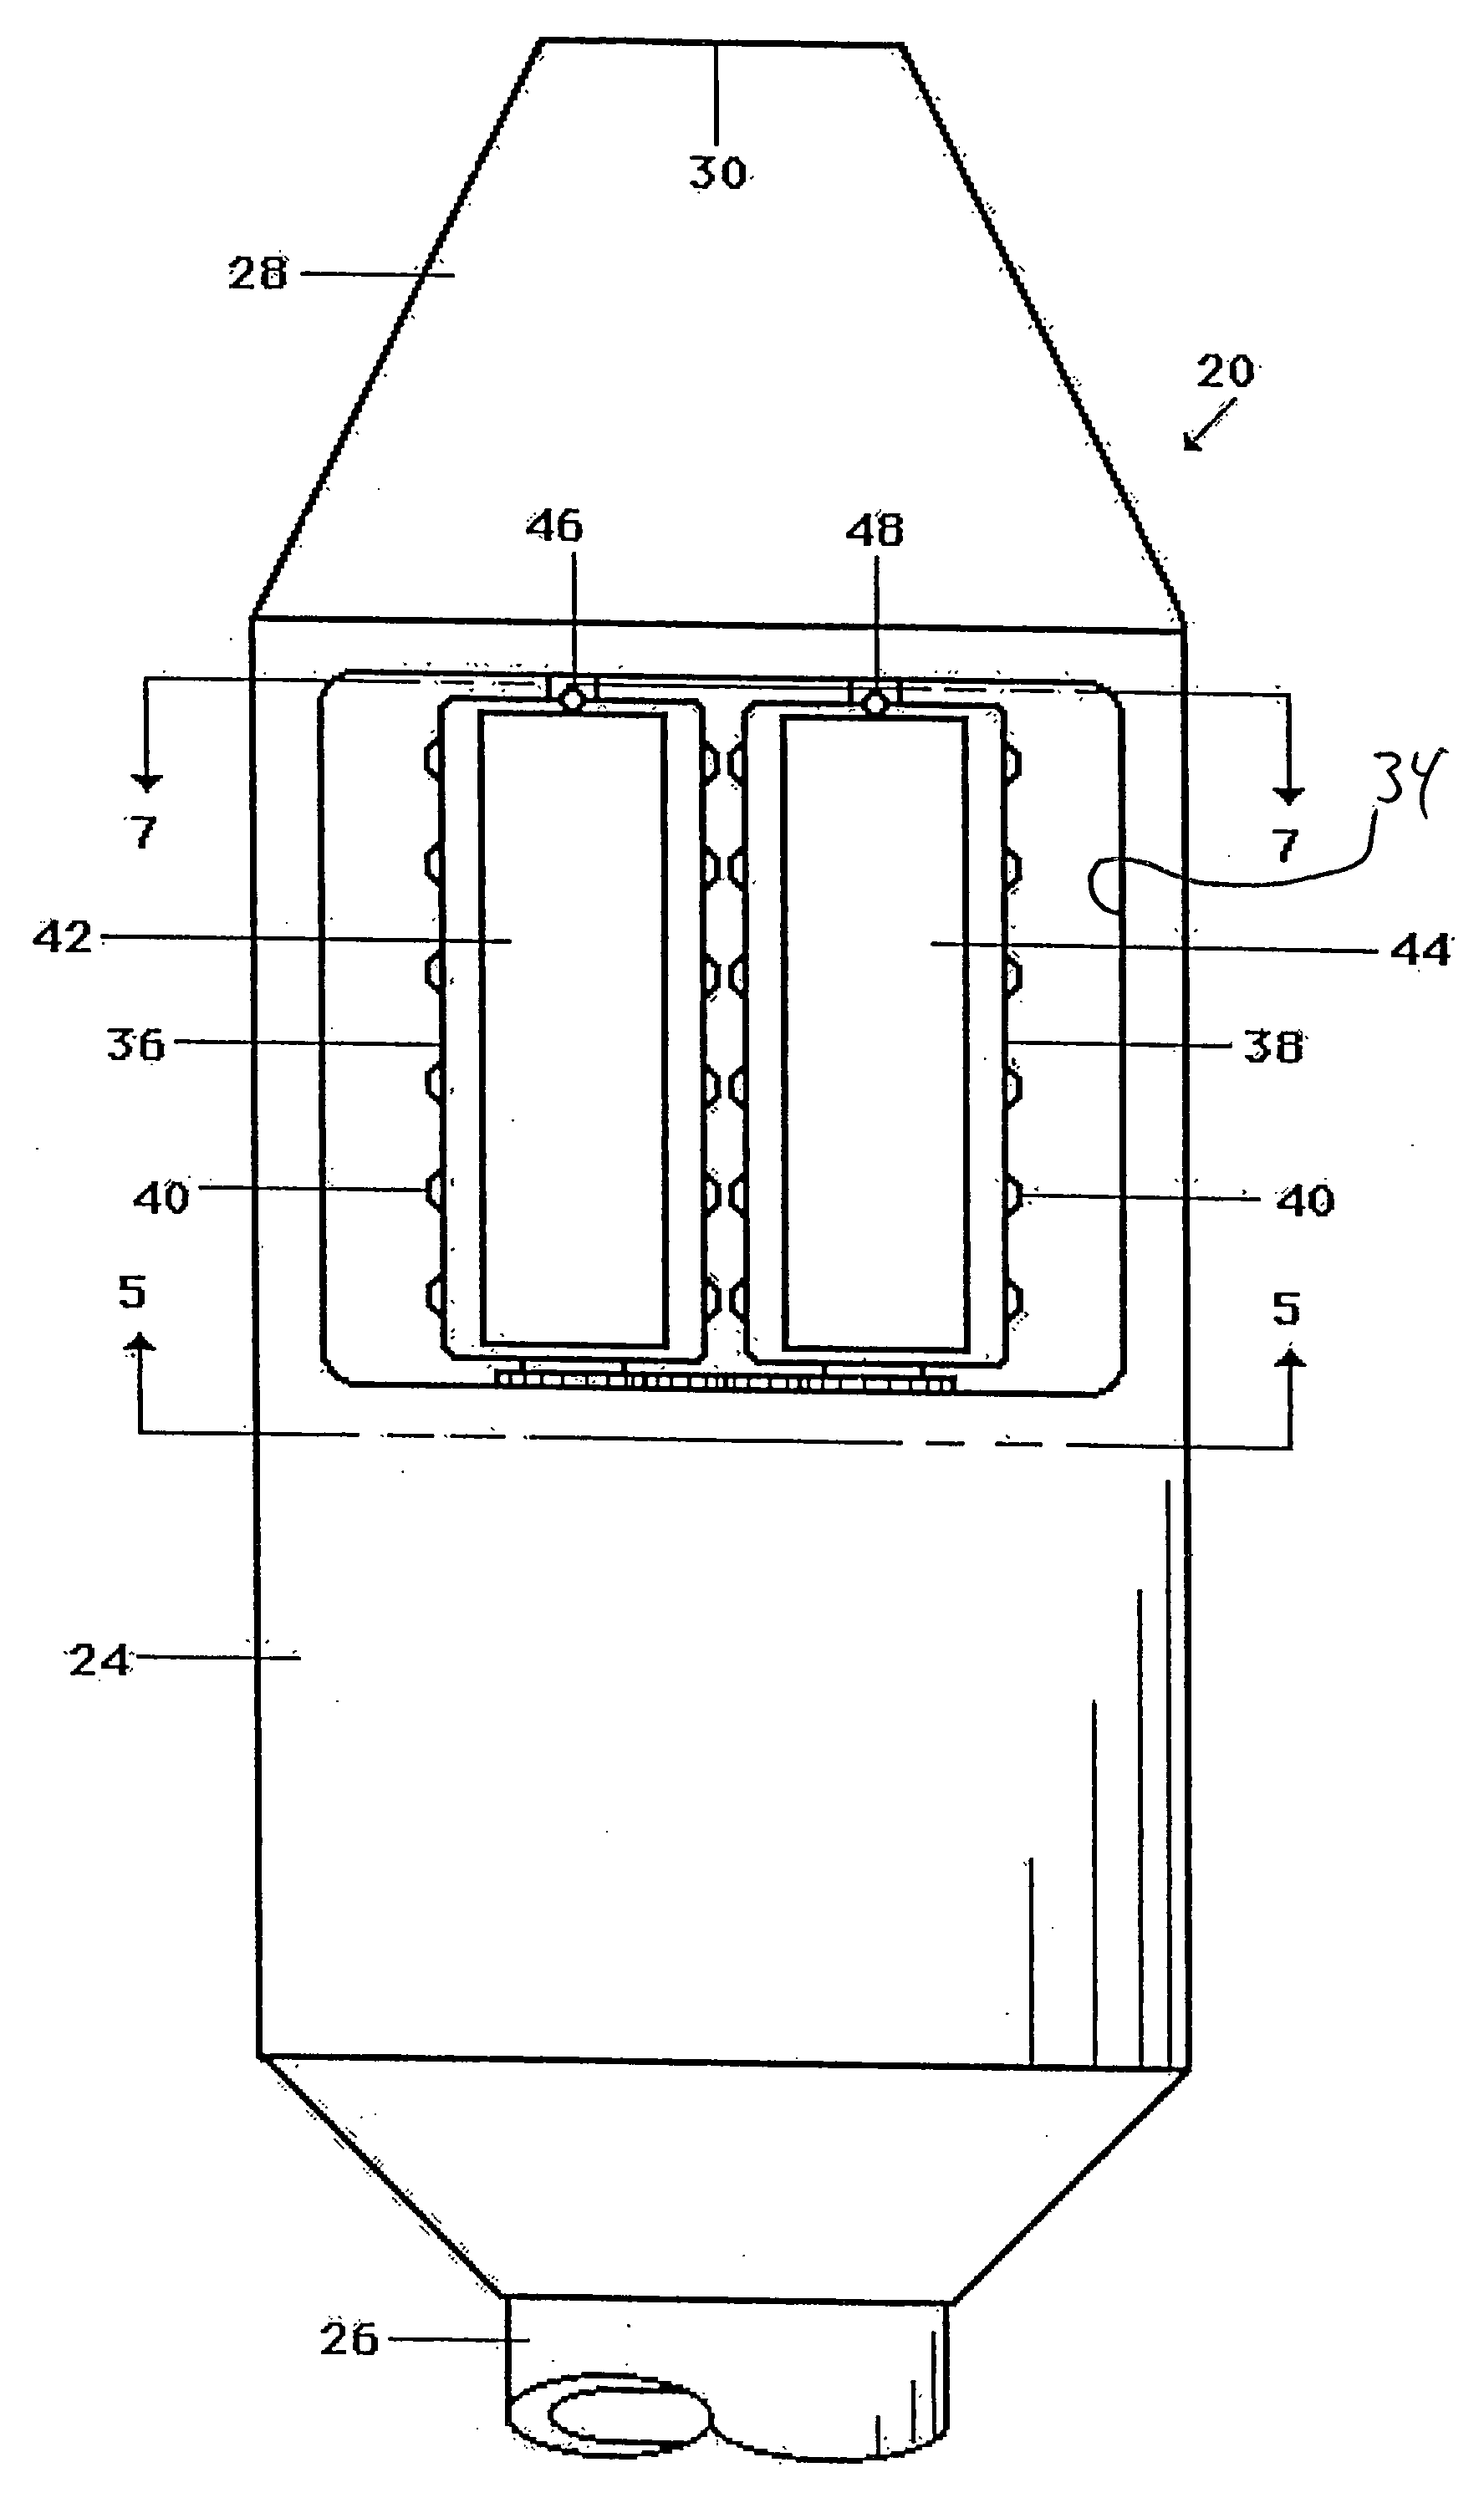 RF ablation device and method of use